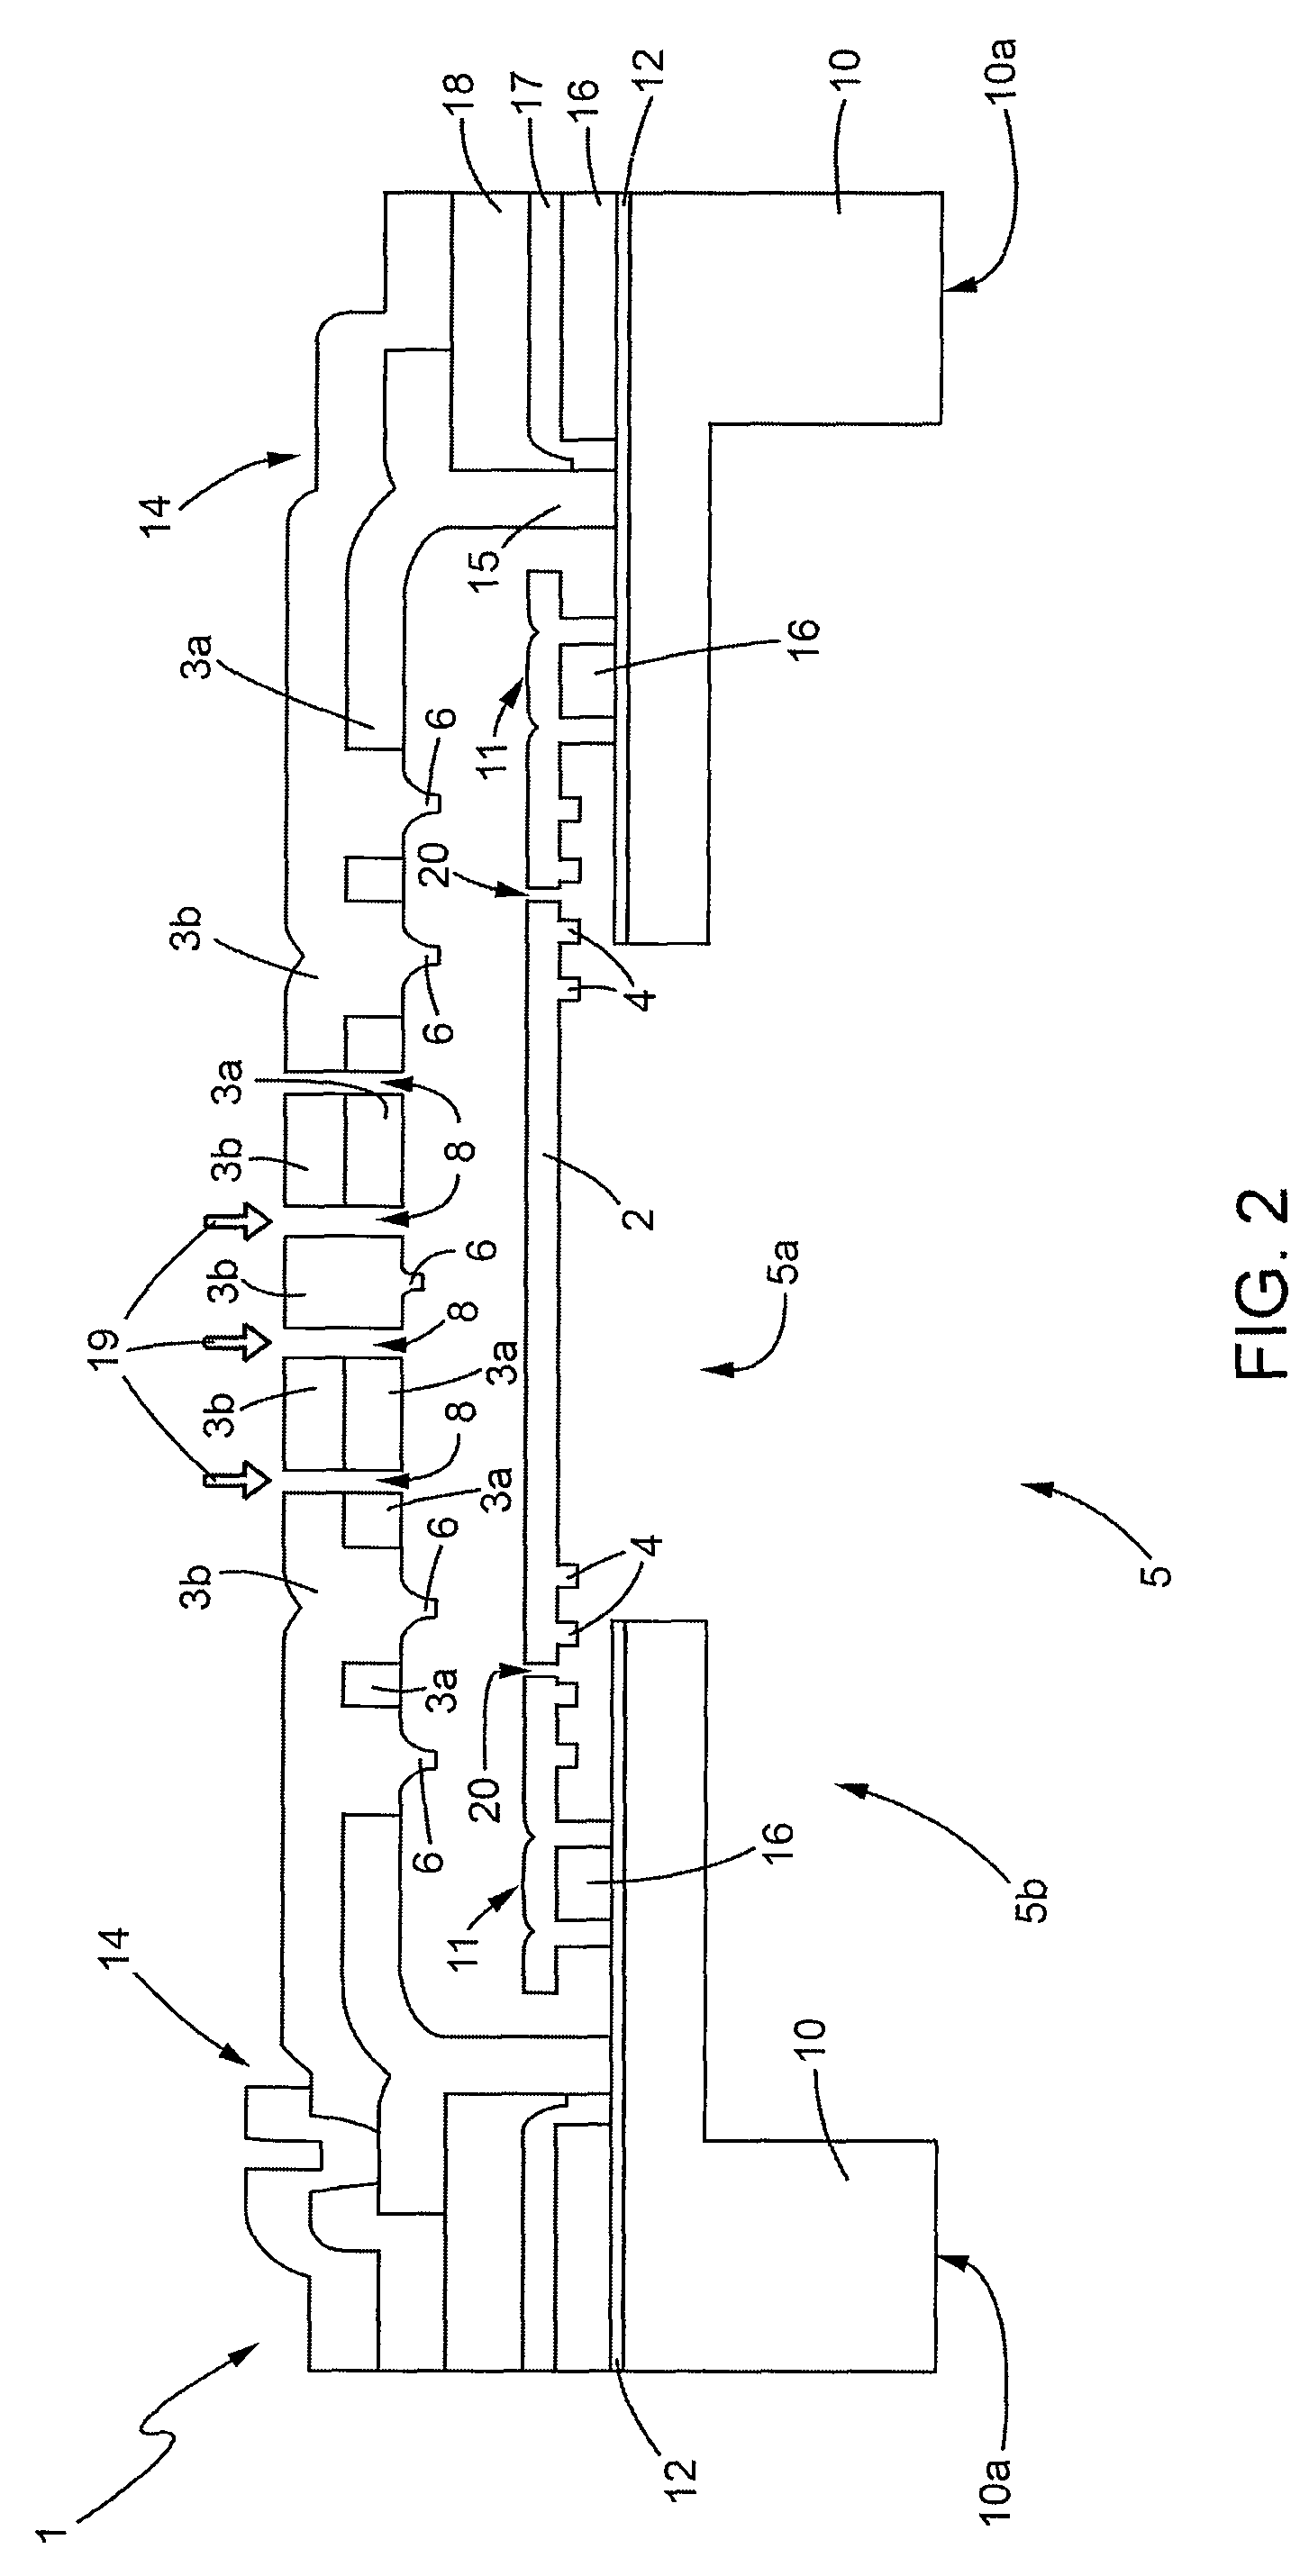 Integrated acoustic transducer obtained using MEMS technology, and corresponding manufacturing process